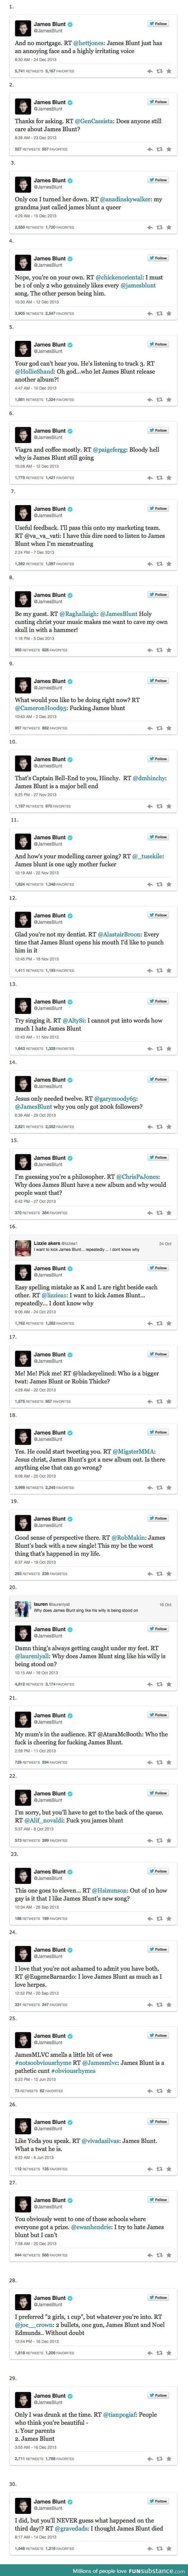 30 reasons why James Blunt won twitter